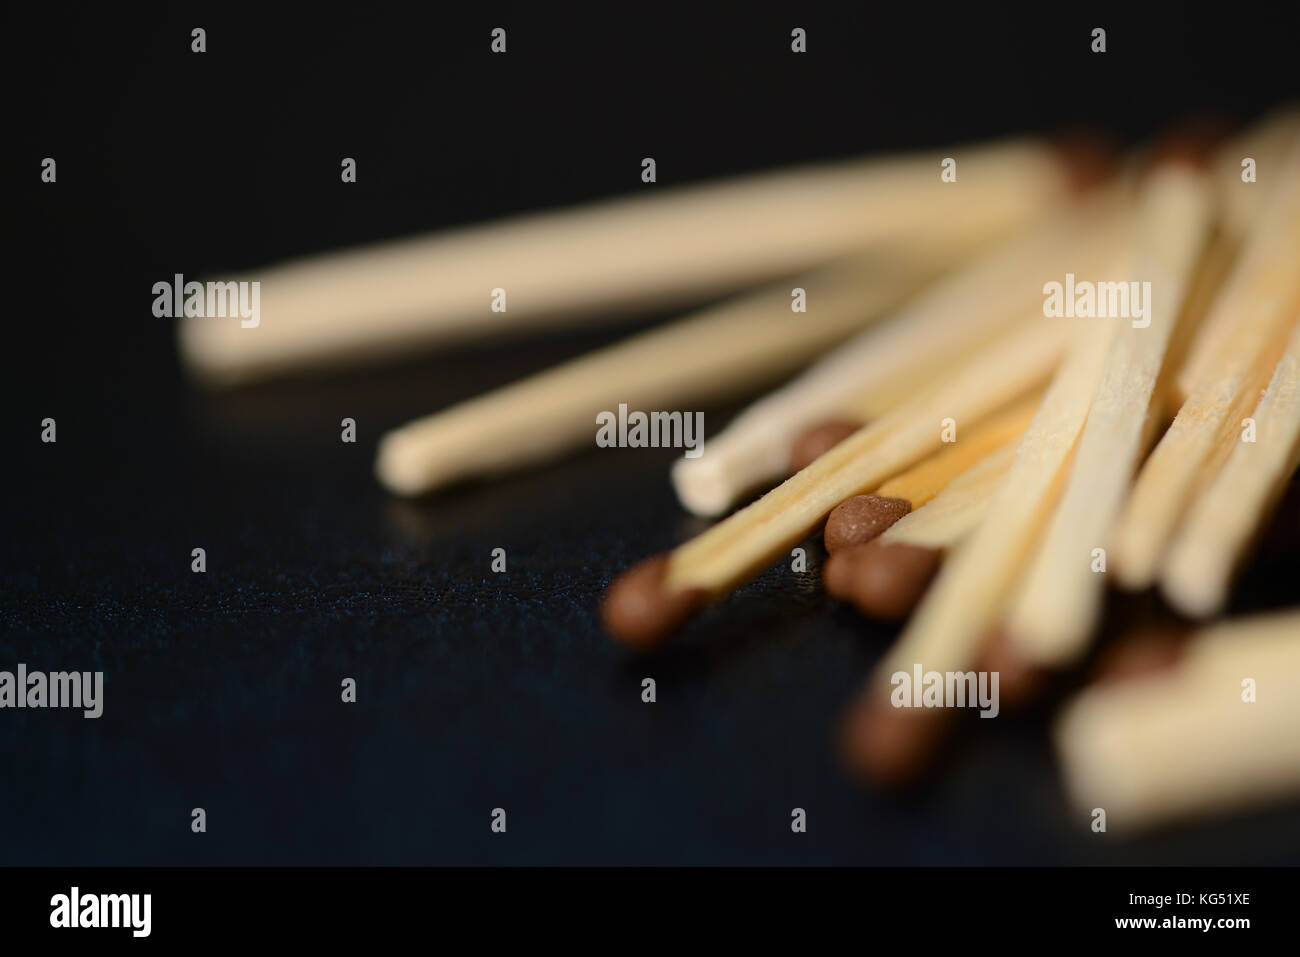 Scattered matches on dark background close up Stock Photo